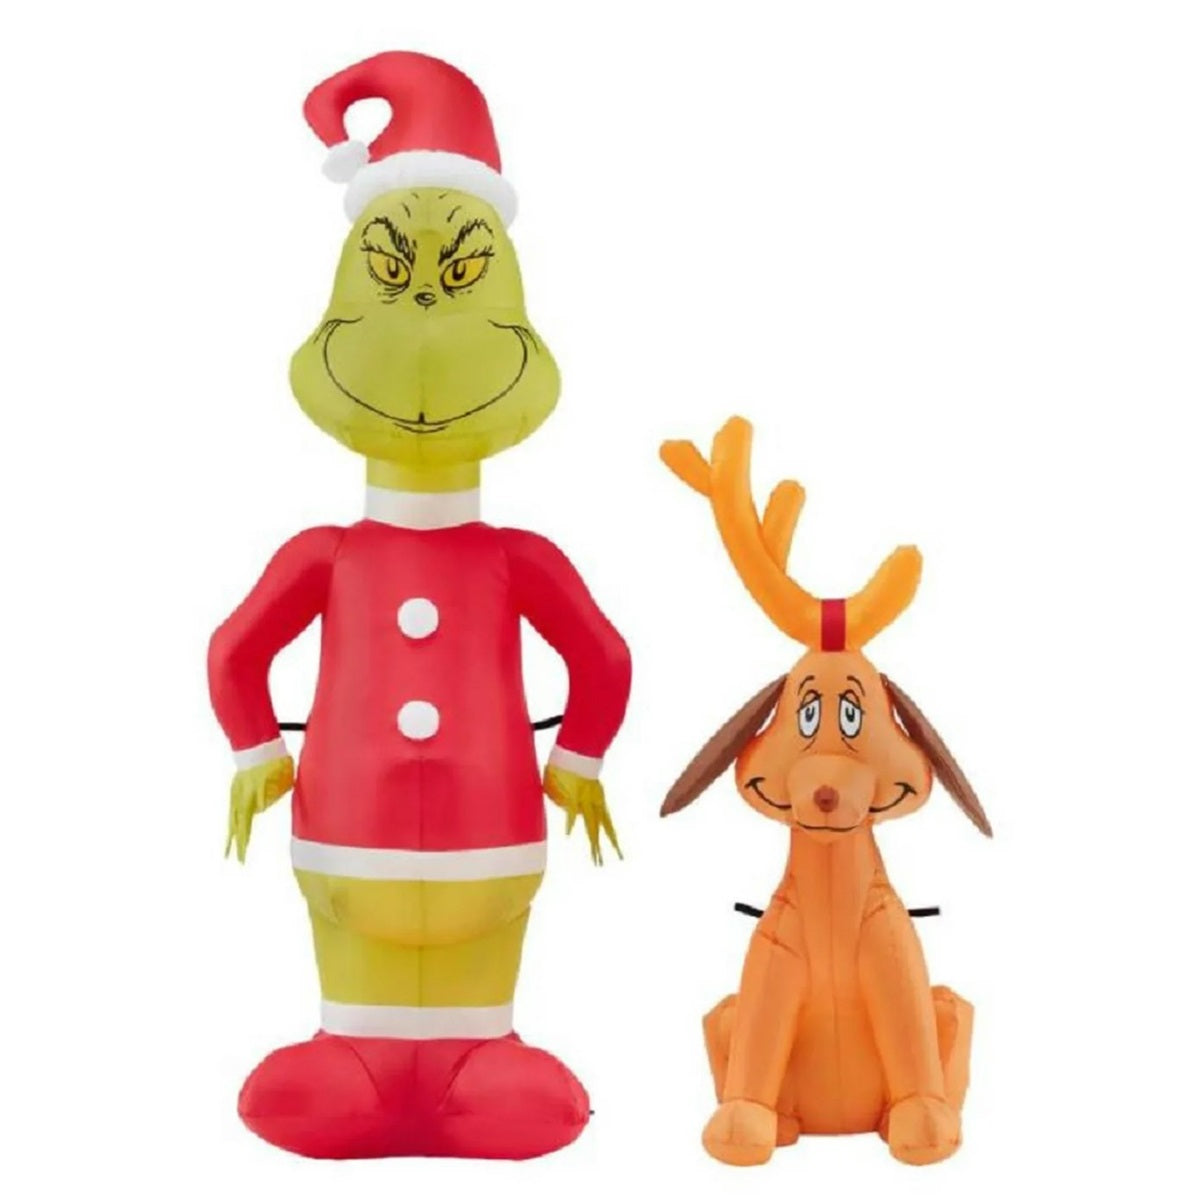 The Grinch and Max Airblown Inflatables Holiday Airblown Yard Decoration 4.5FT Tall